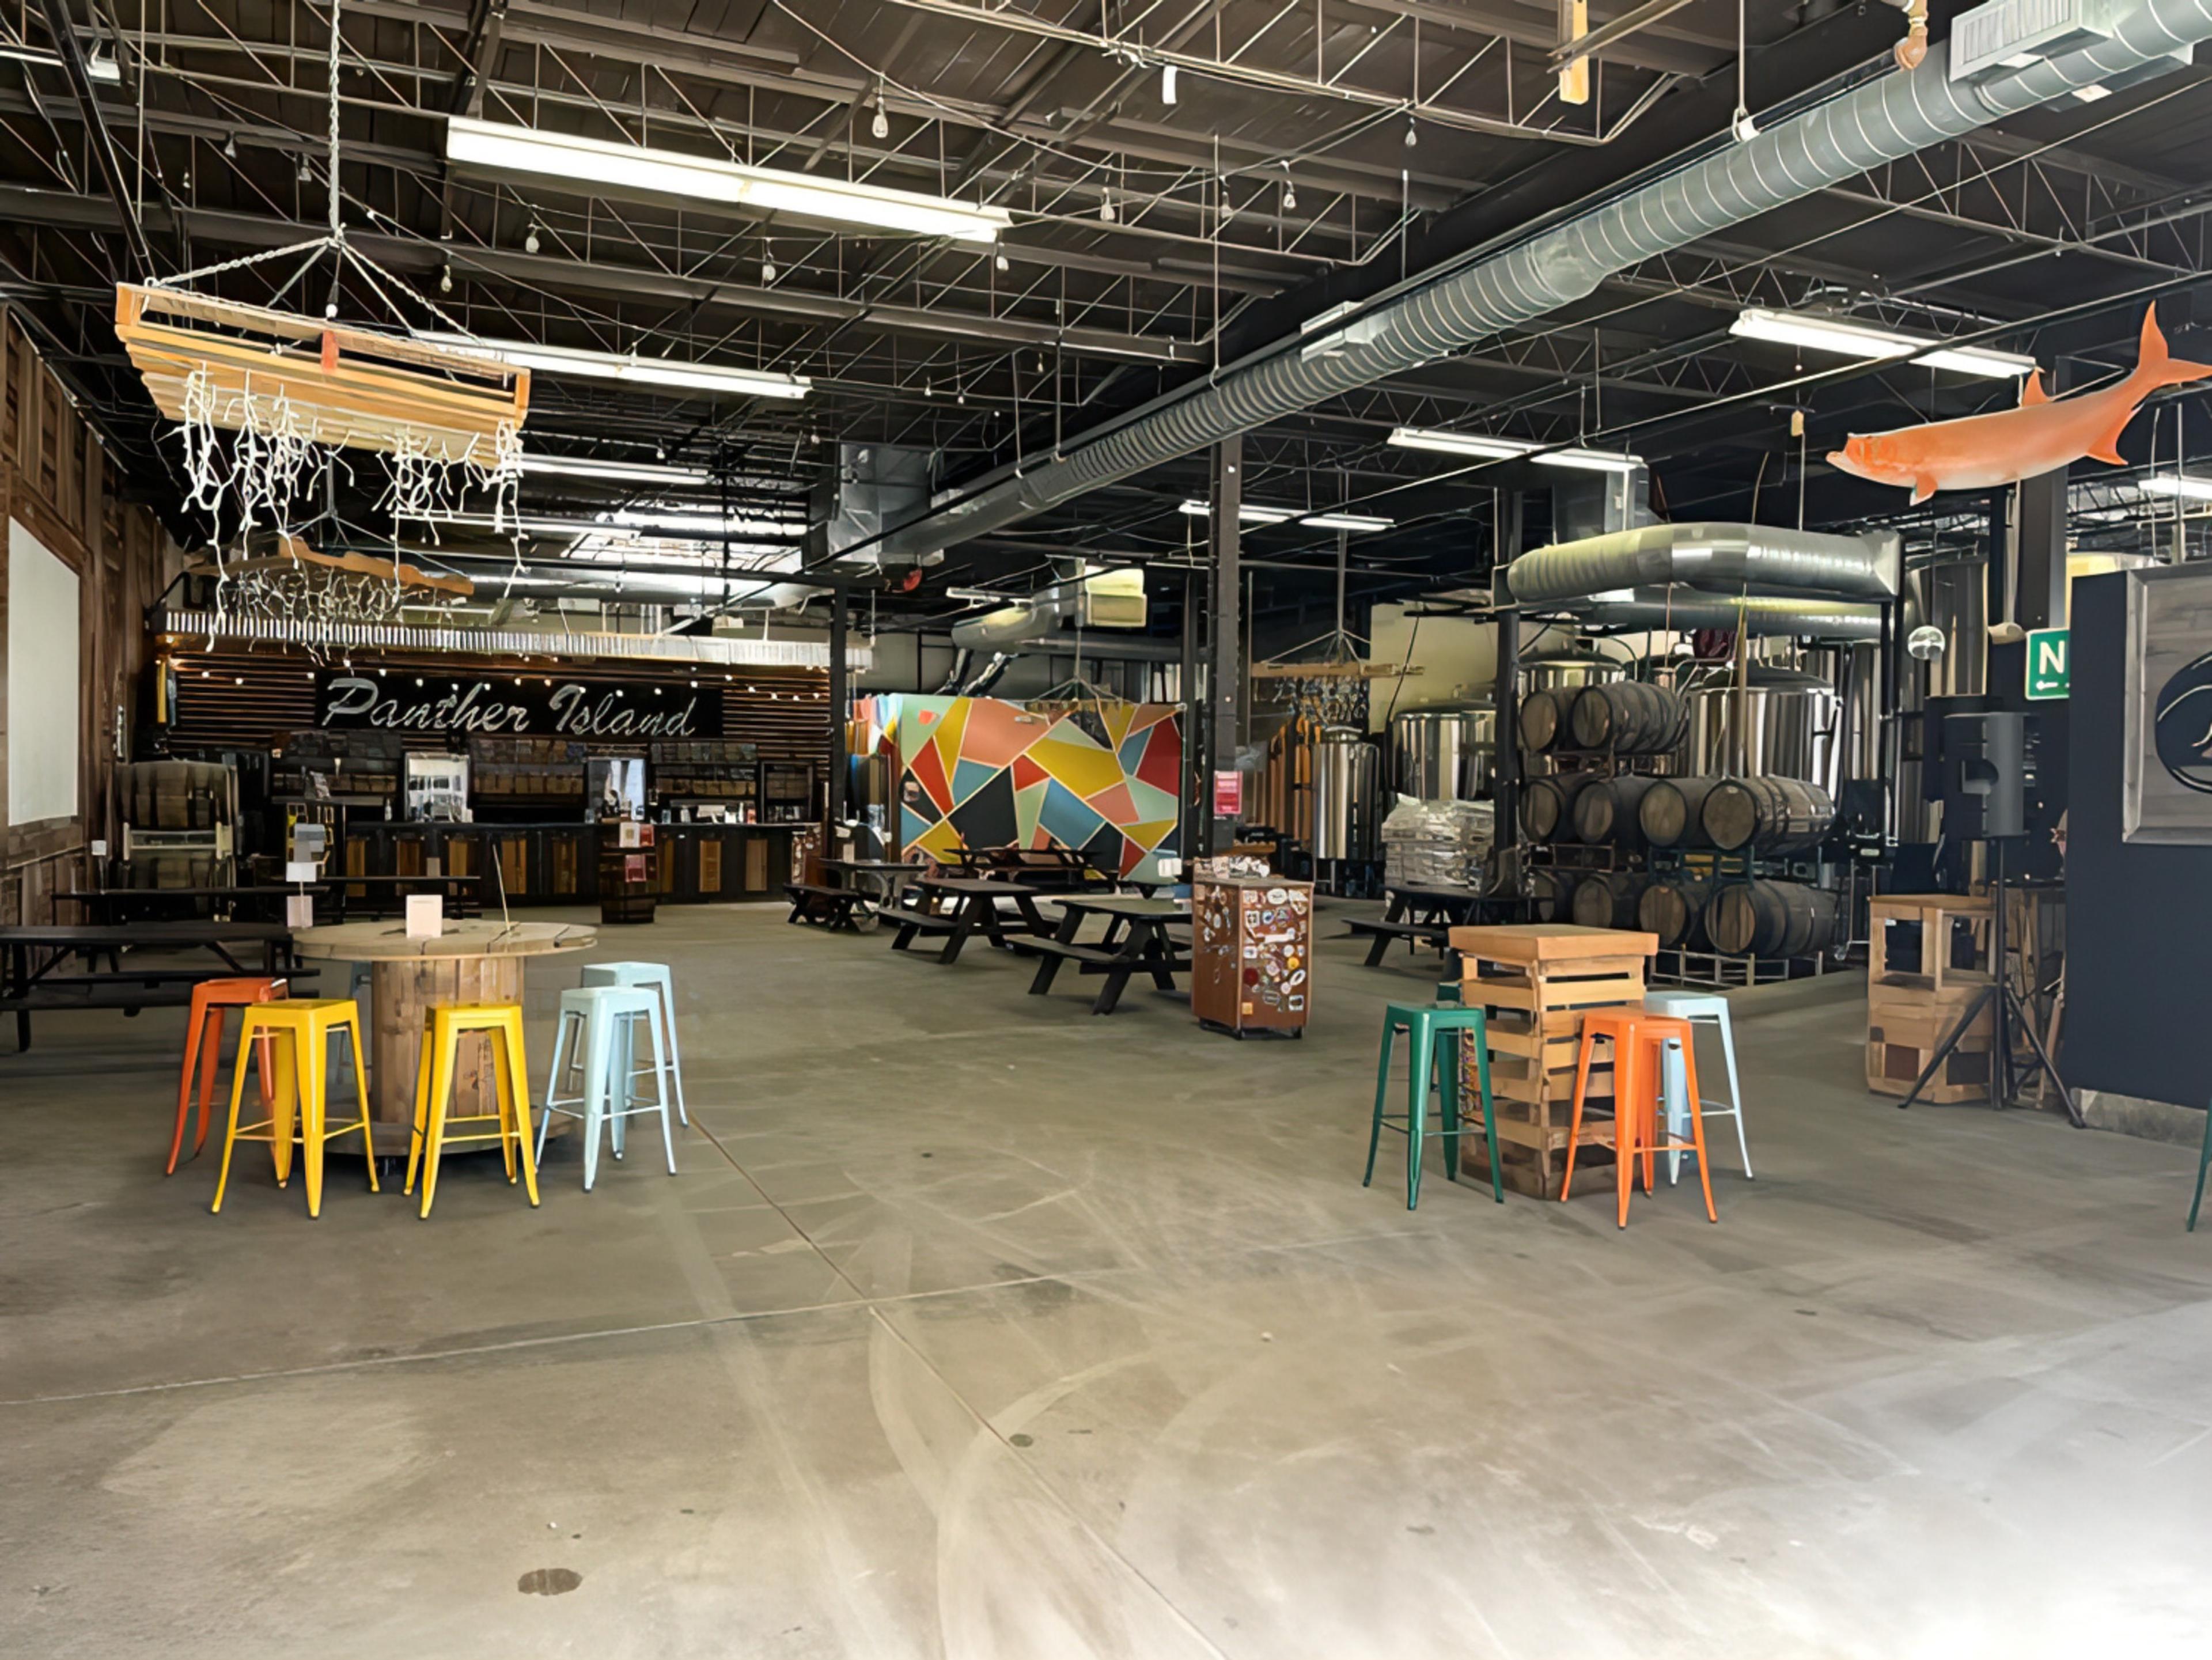 Panther Island Brewing